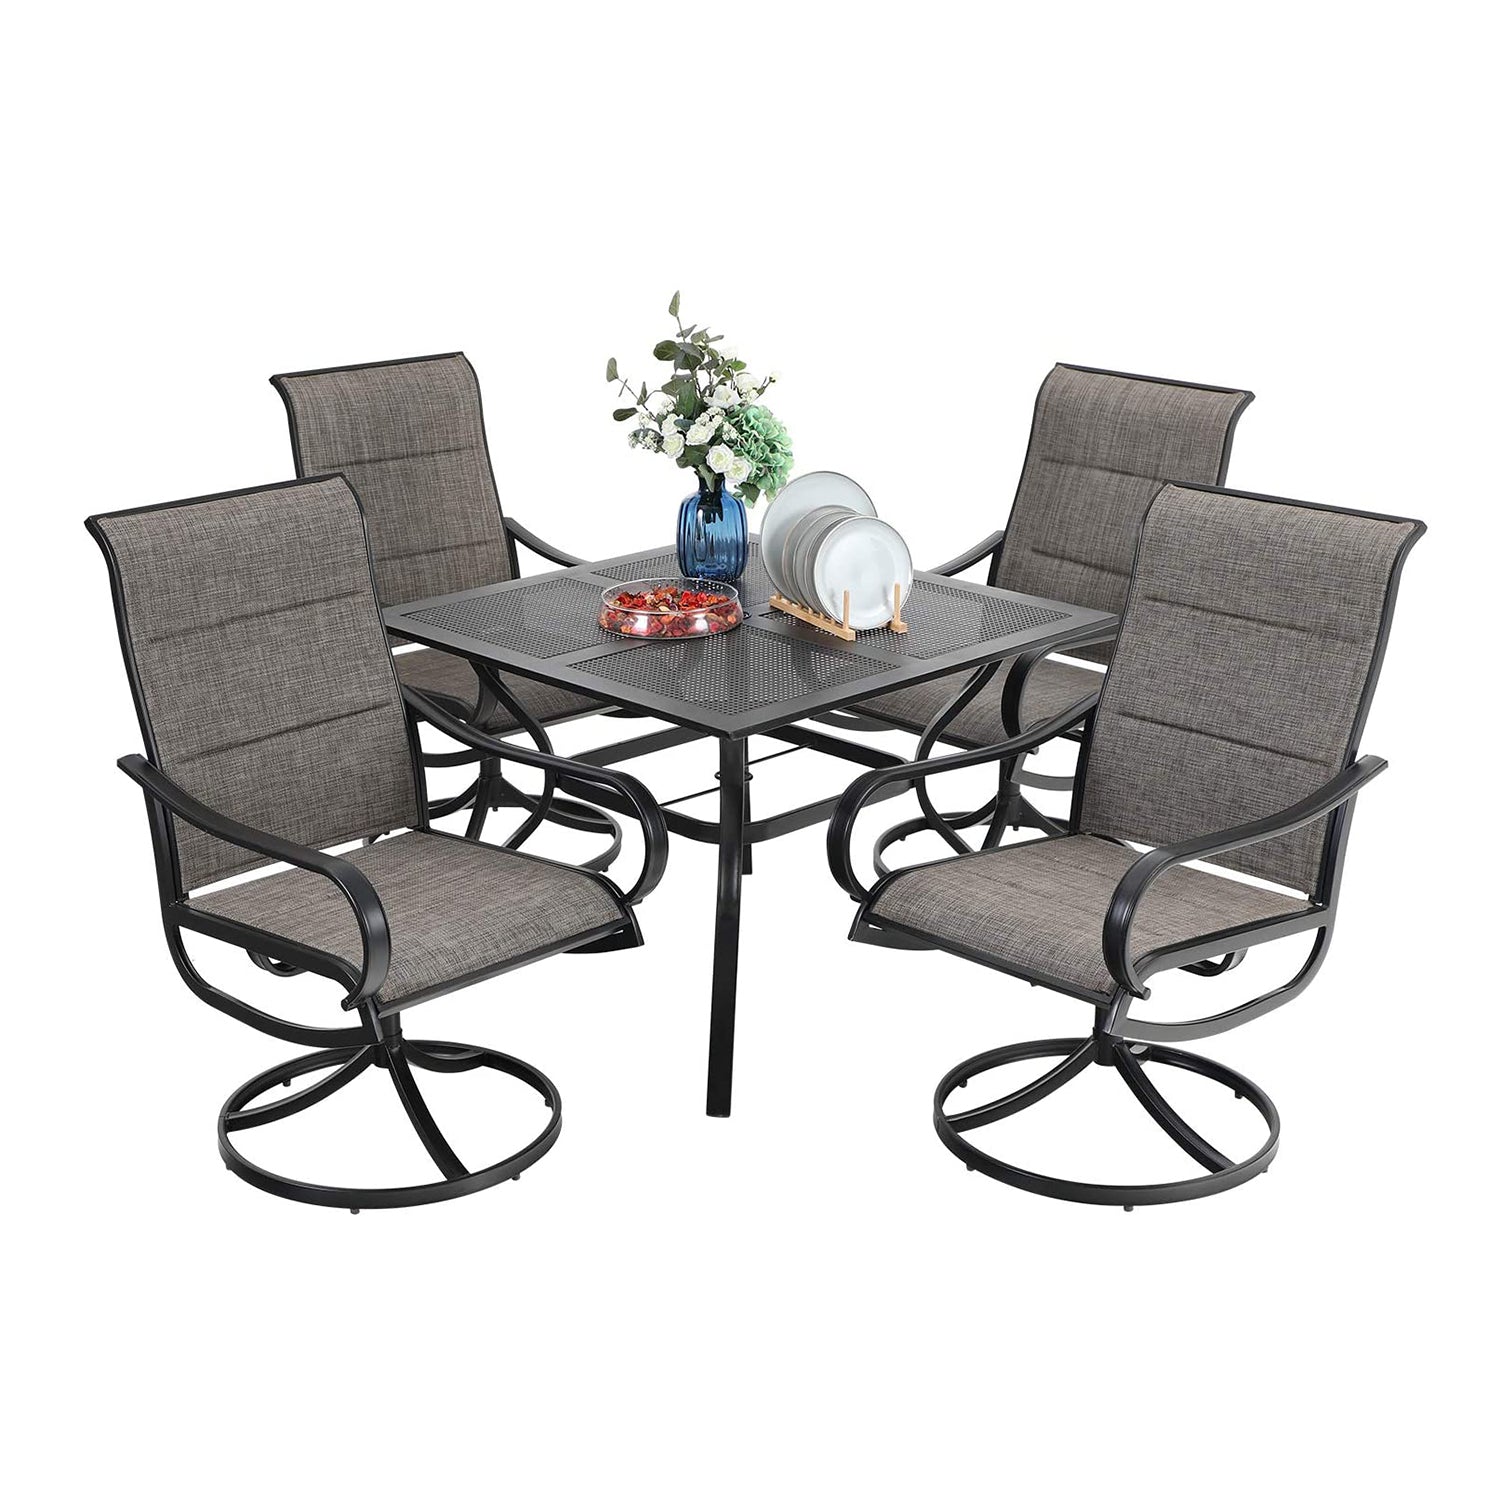 PHI VILLA Mesh Square Table and 4 Textilene Swivel Chairs 5-Piece Outdoor Dining Set